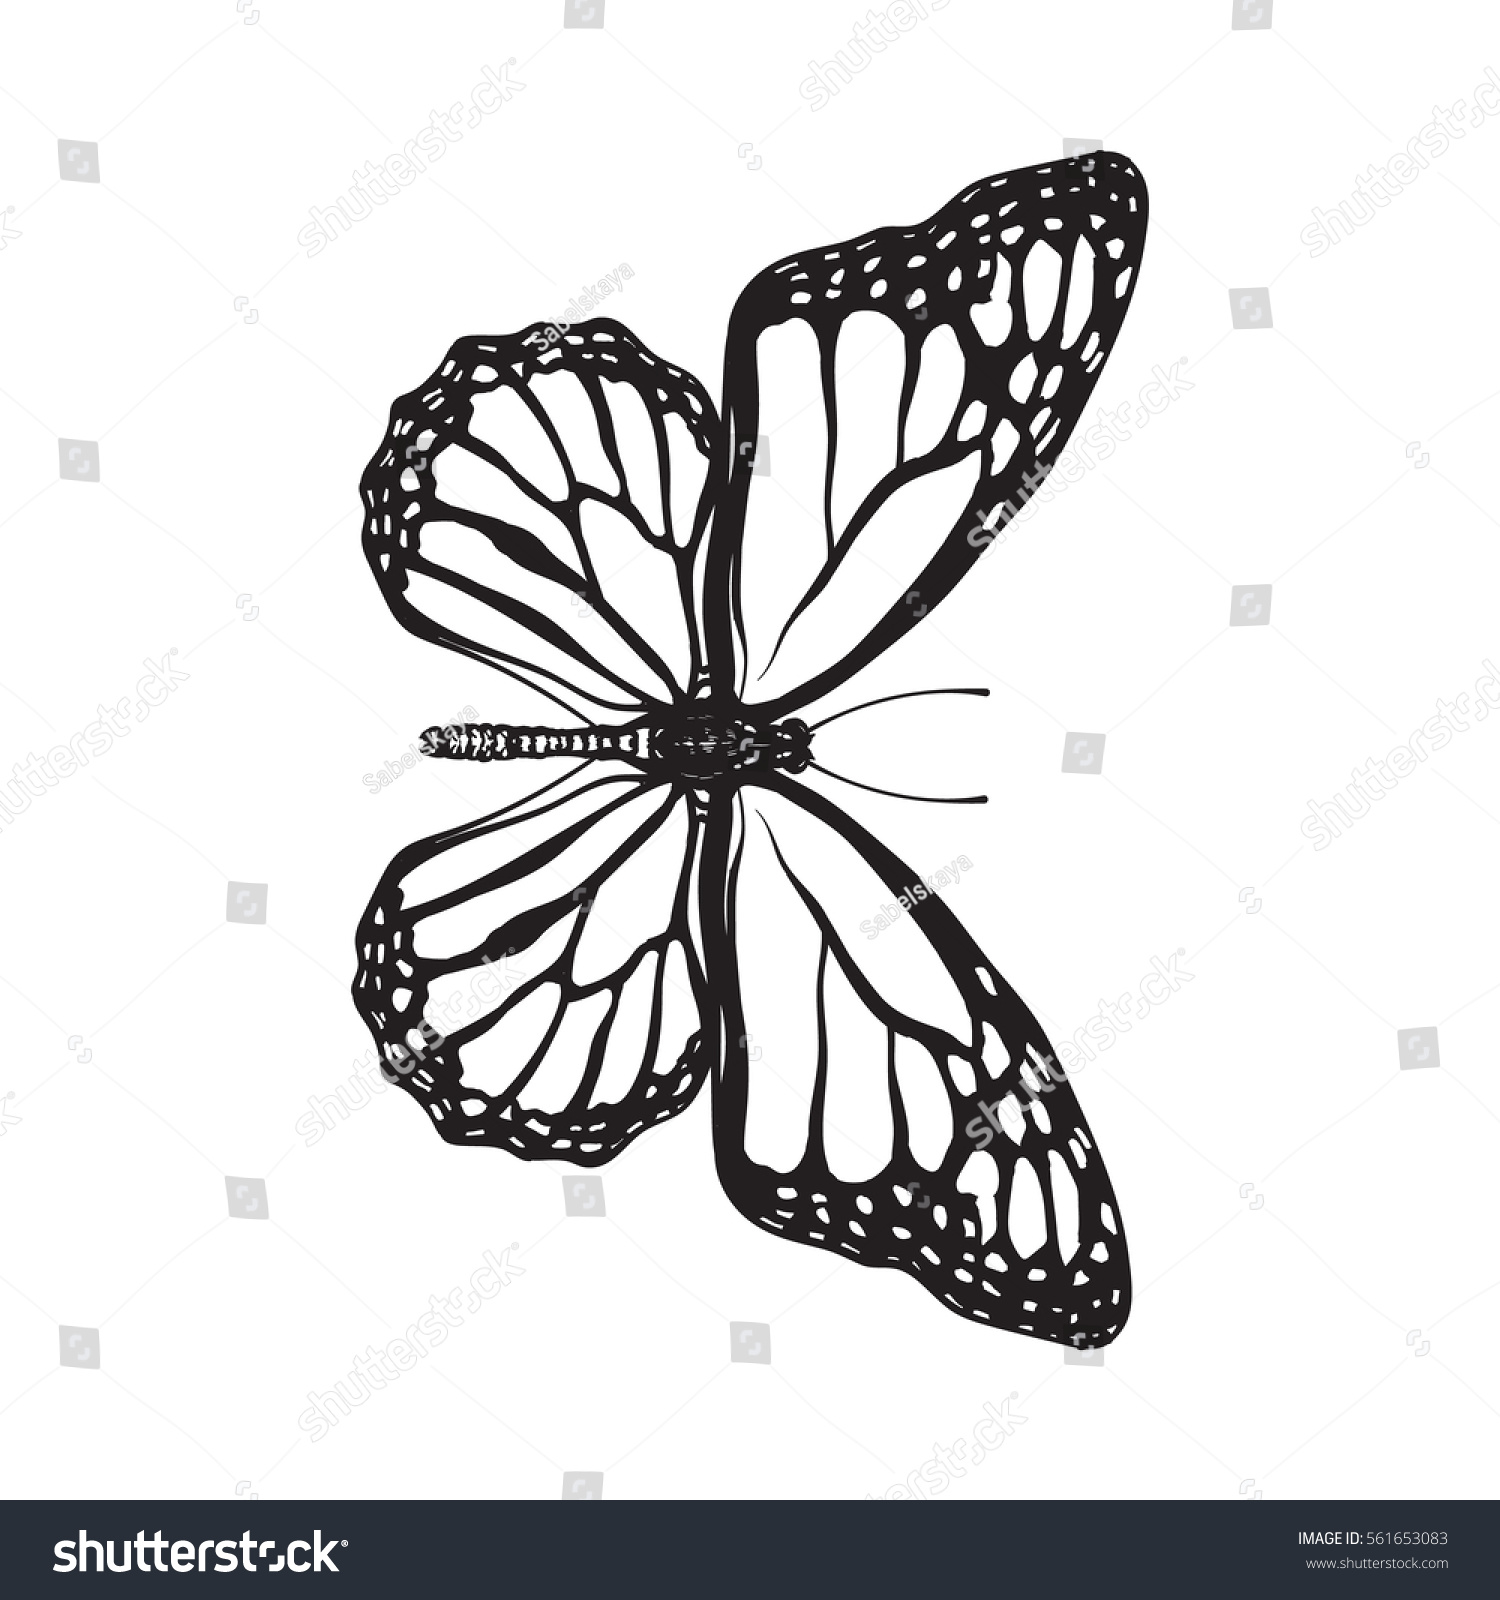 Top View Beautiful Monarch Butterfly Sketch Stock Photo (Photo ...